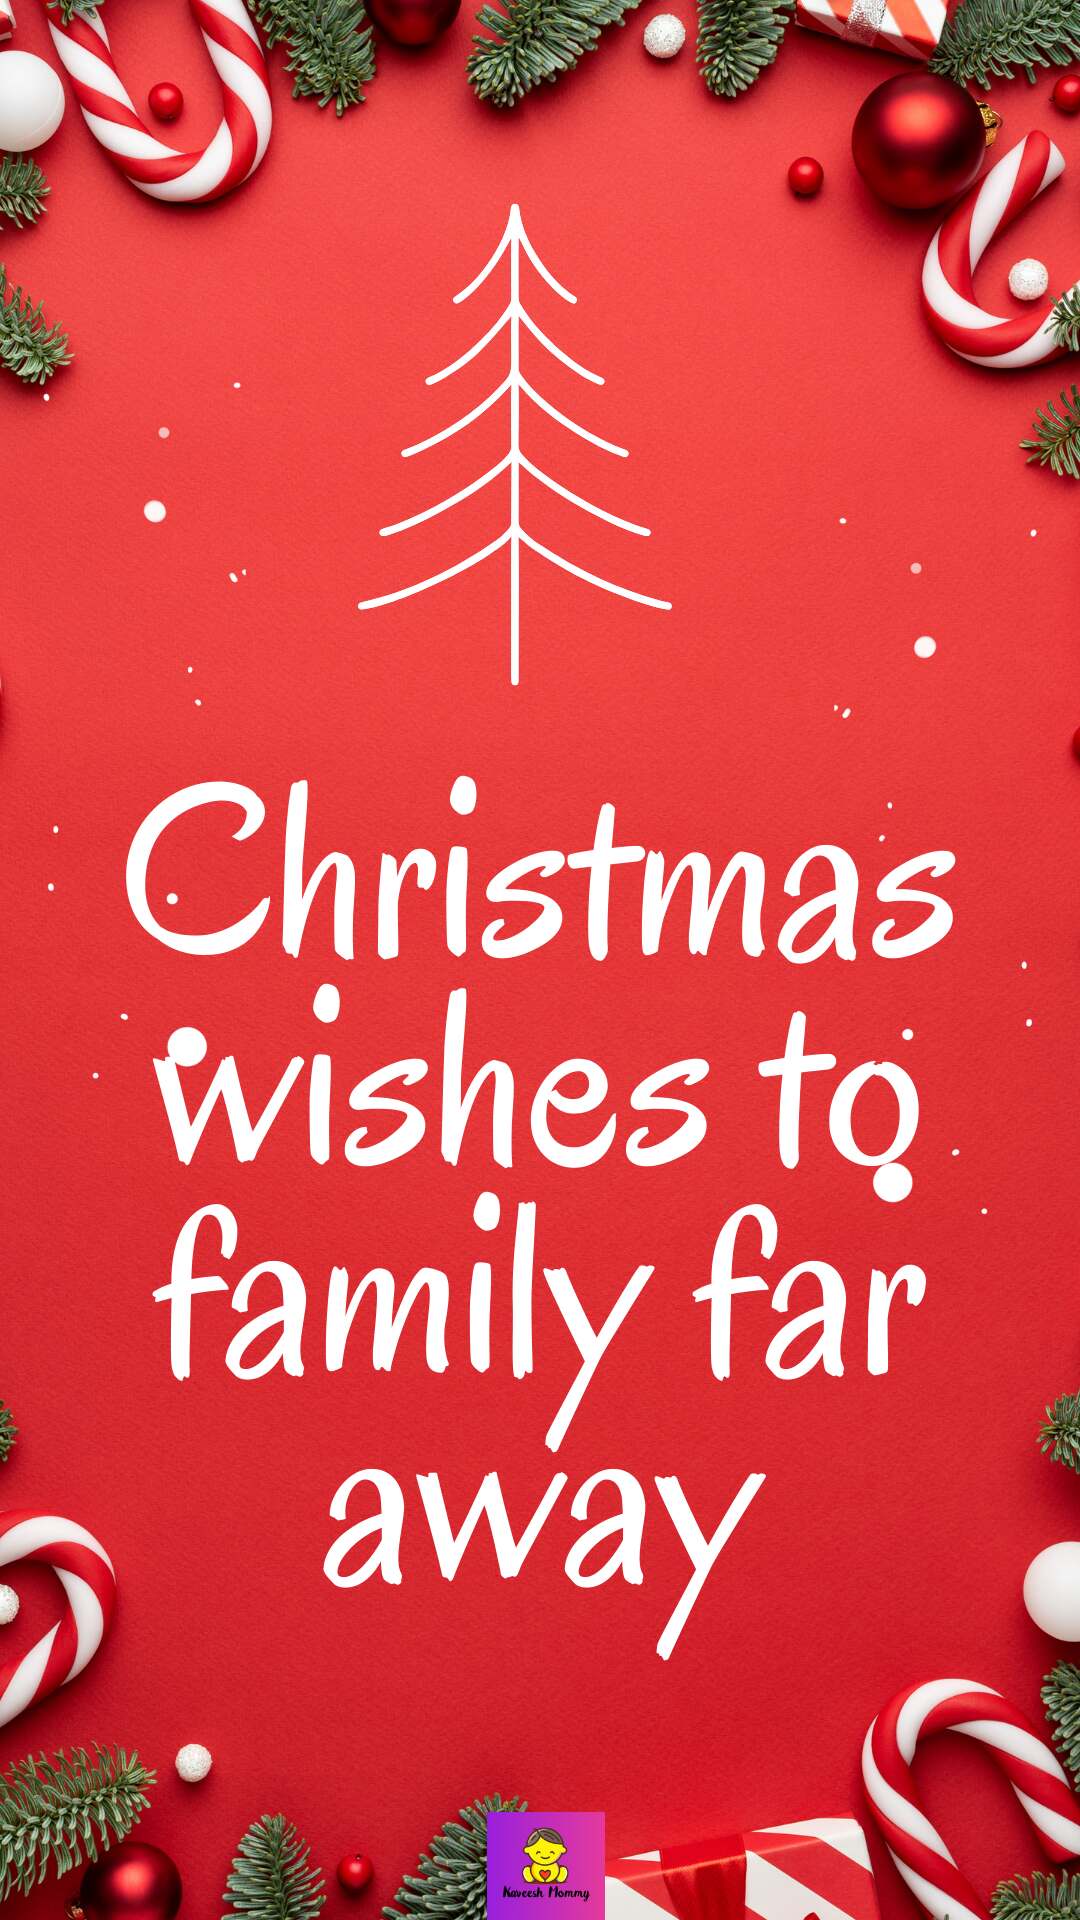 List of Christmas Wishes for Family Far Away